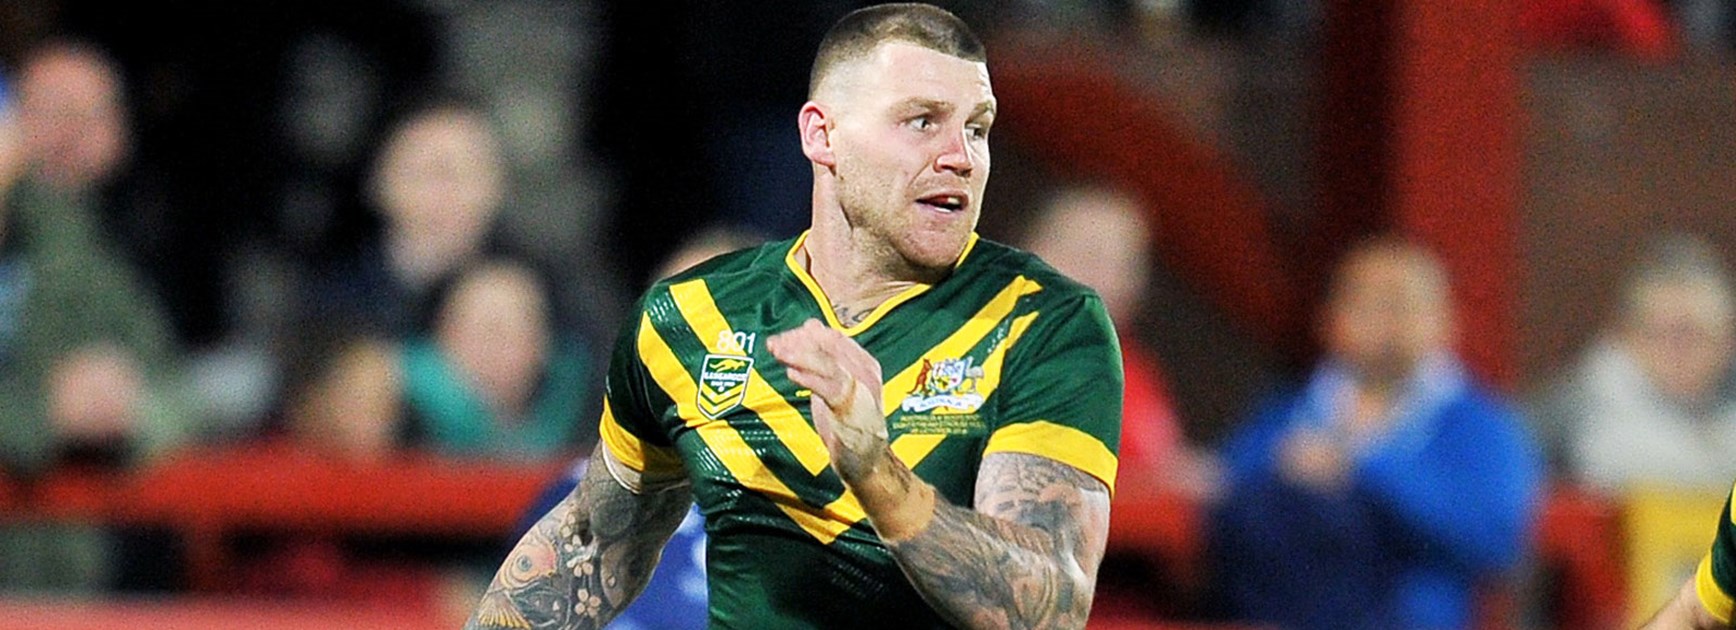 Kangaroos centre Josh Dugan was taken from the field with concussion in Australia's win over Scotland.